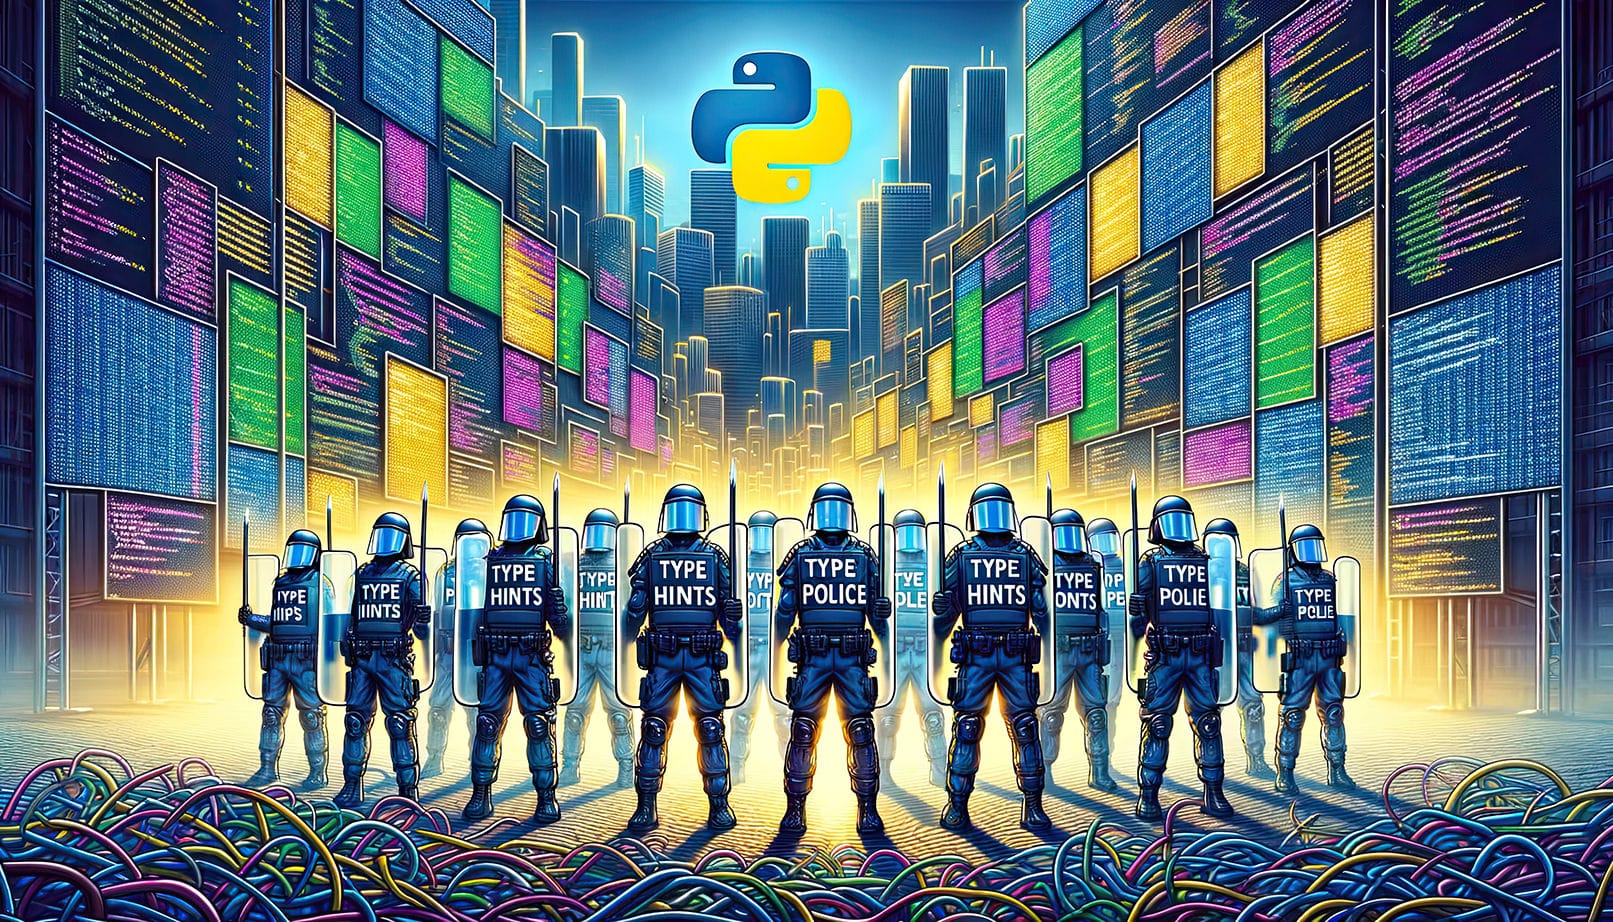 The 'Type Police' in a neon-lit code city, under a Python logo, symbolizing disciplined type hint usage in programming.